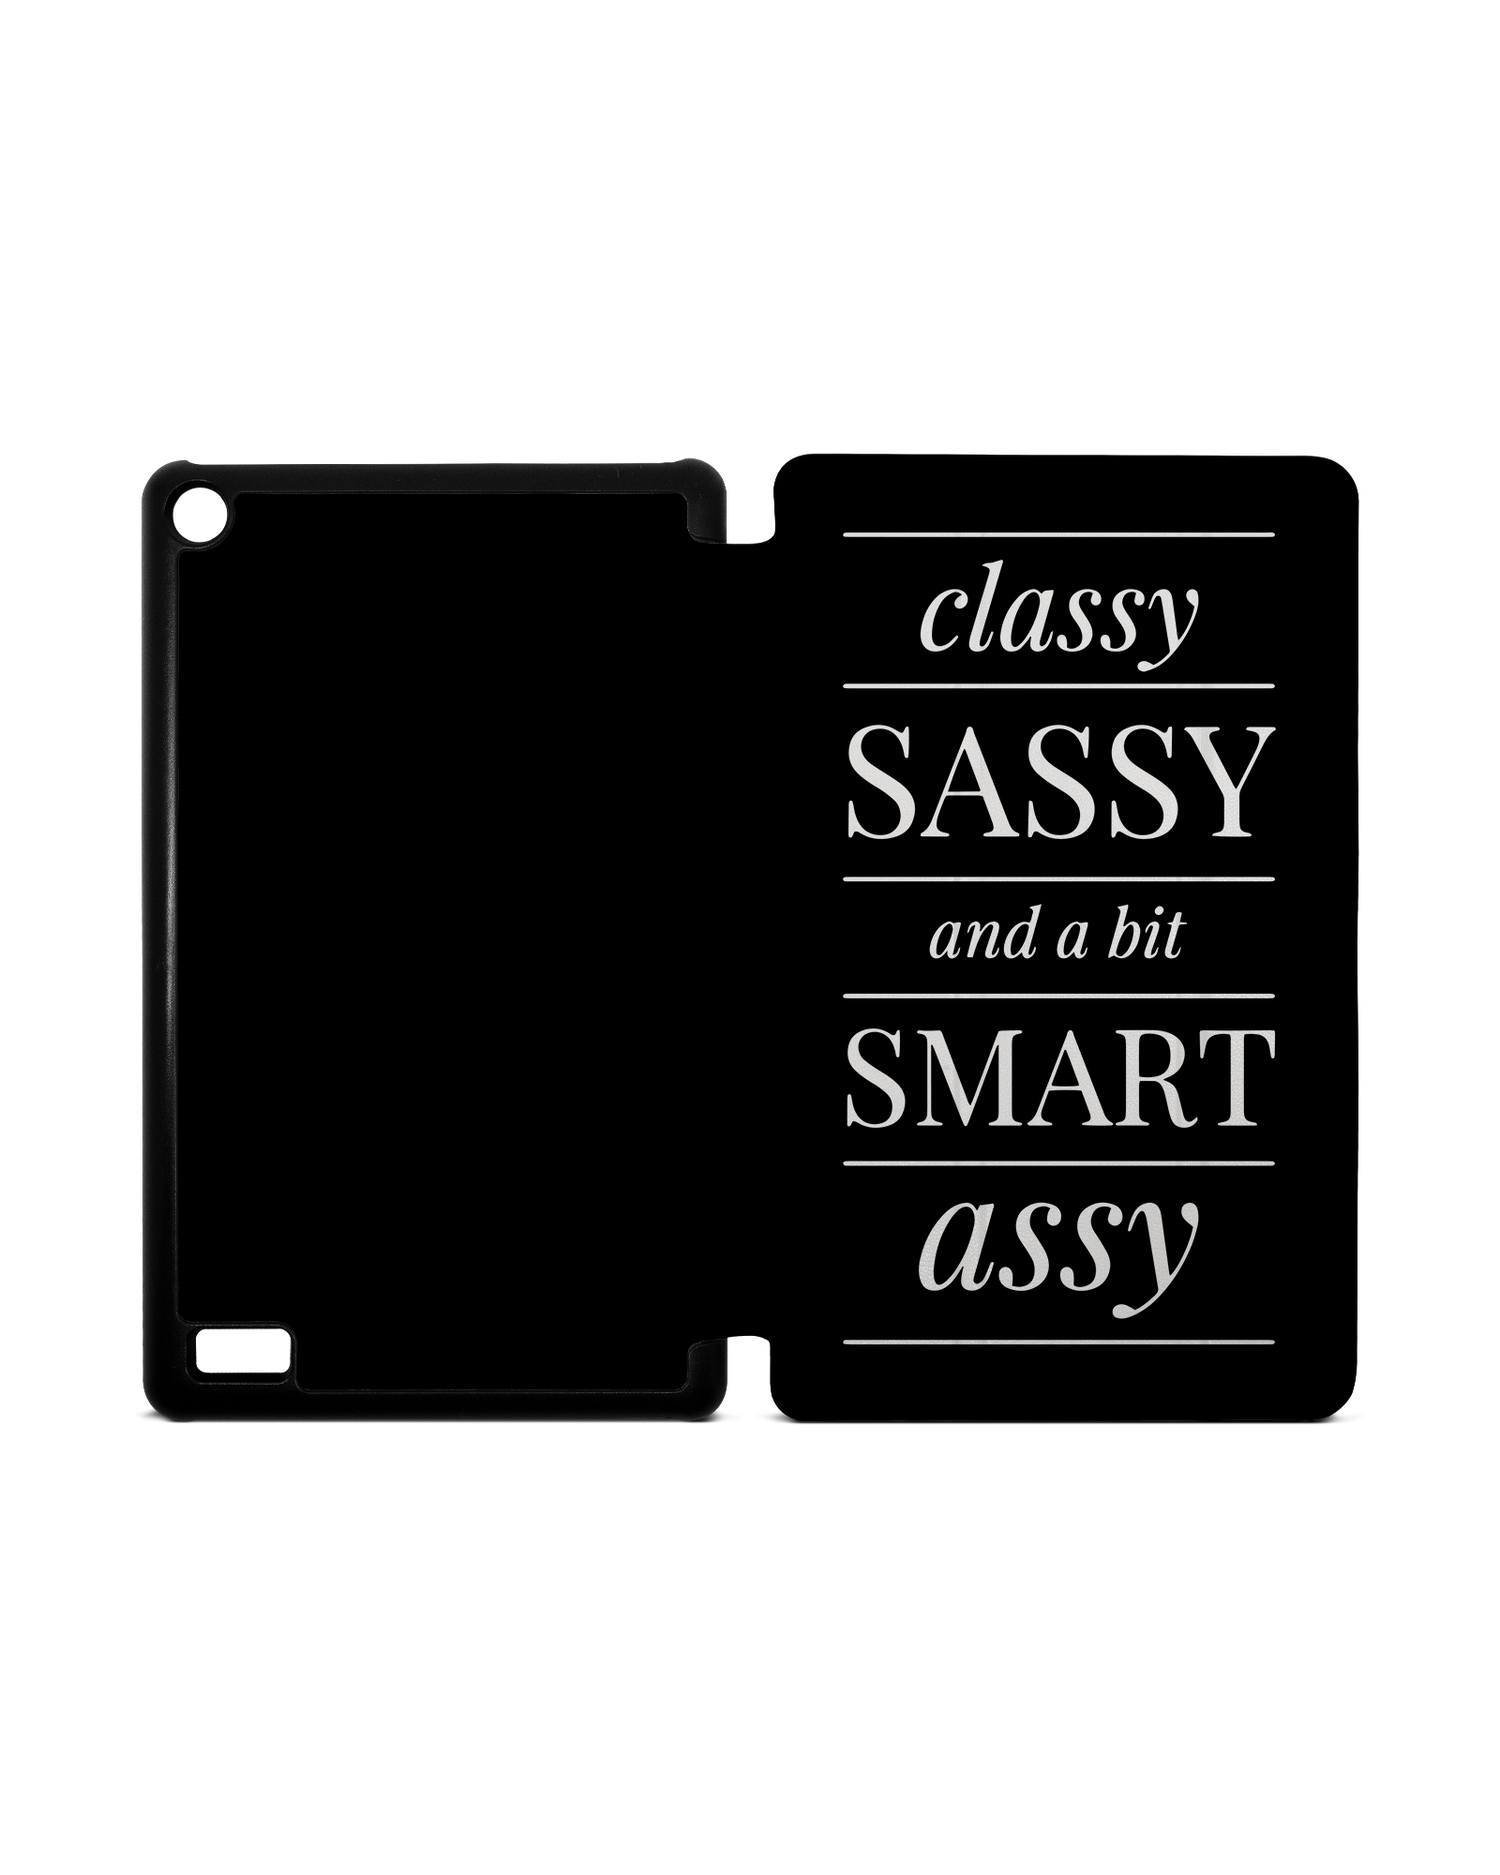 Classy Sassy Tablet Smart Case for Amazon Fire 7: Opened